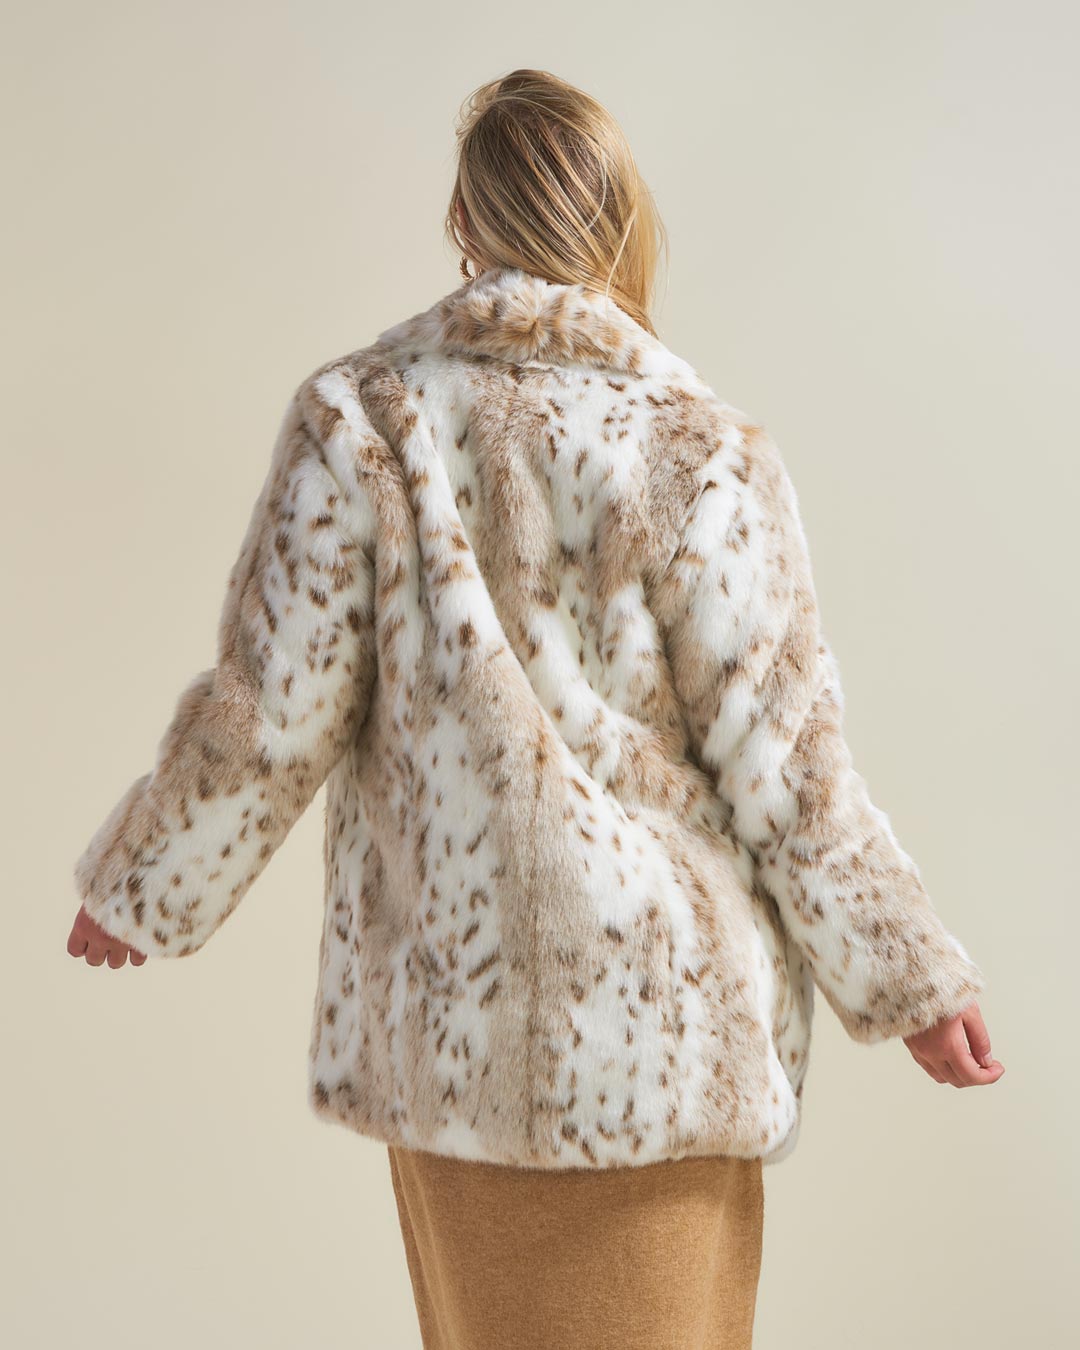 Back View of Siberian Snow Leopard Collared Faux Fur Coat on Blonde Model